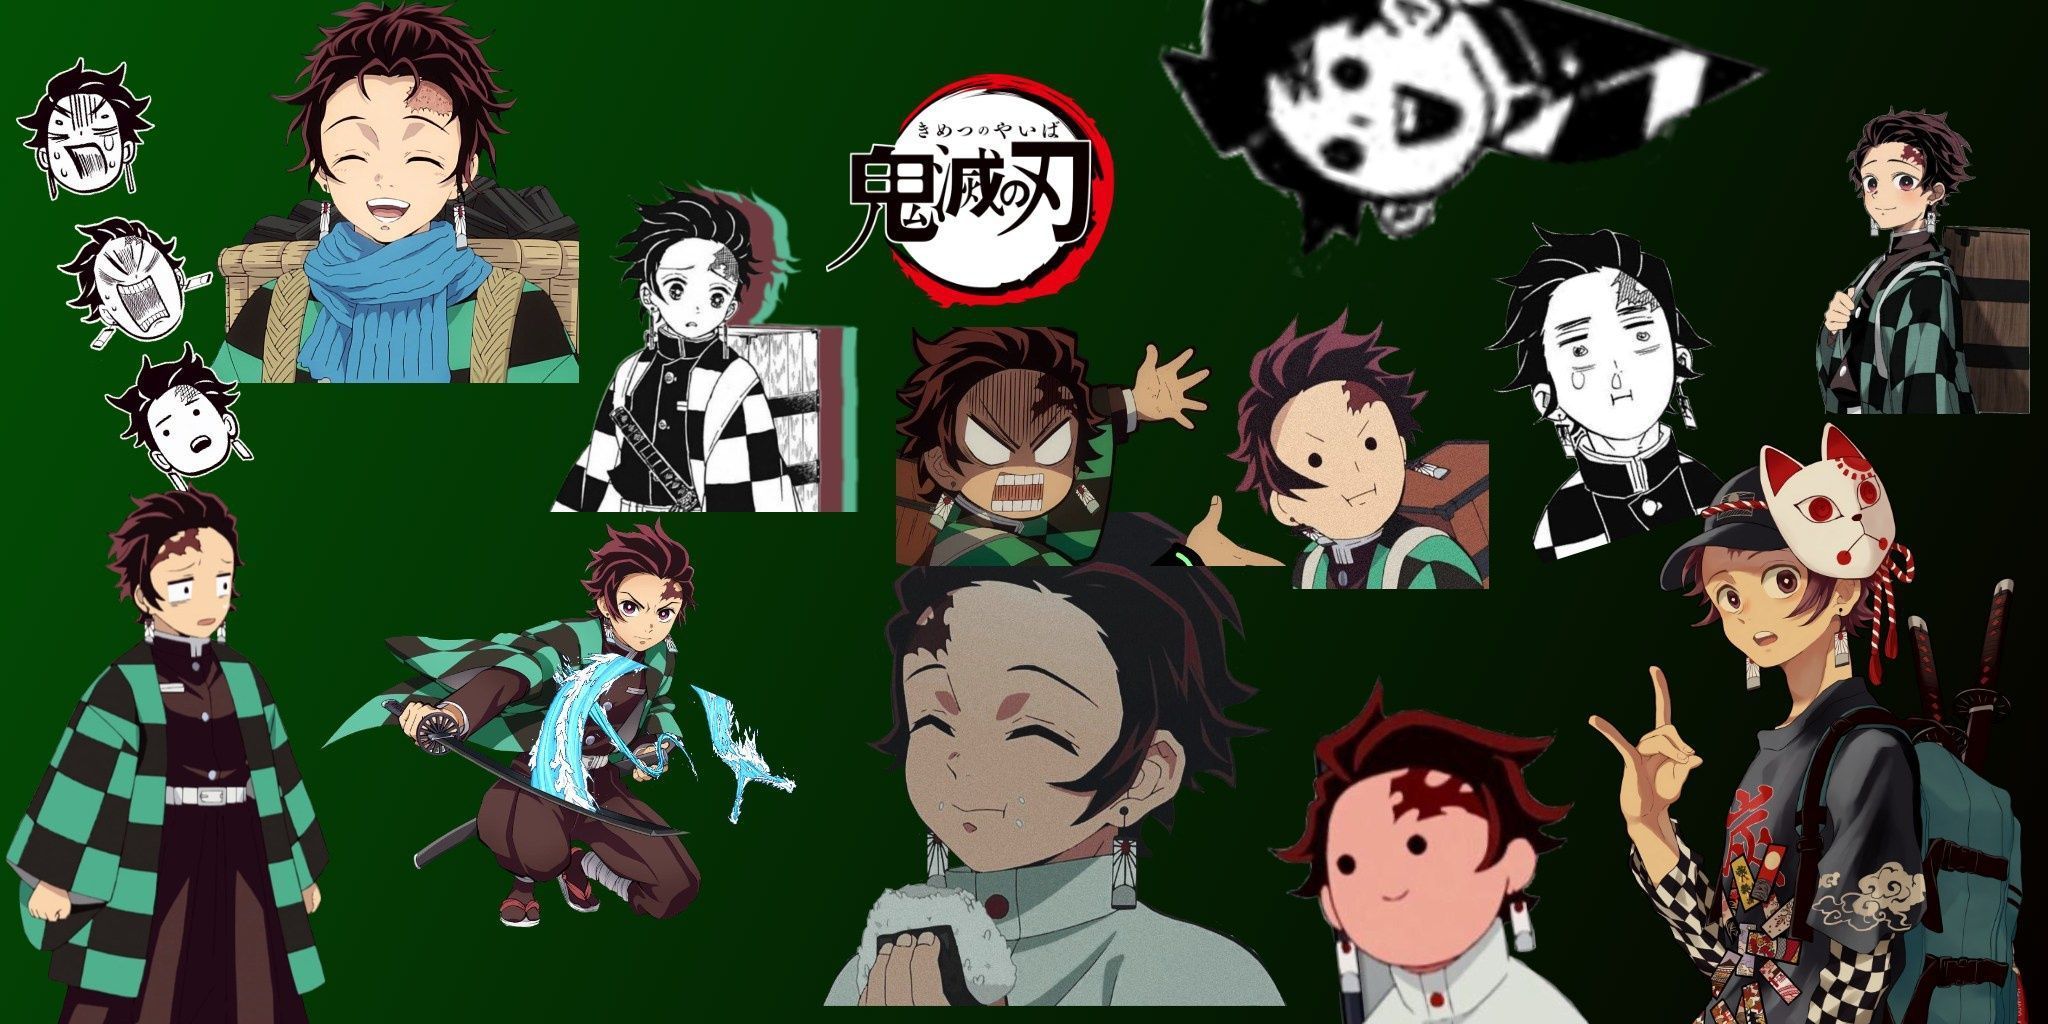 Collage of all the characters from Demon Slayer - Tanjiro Kamado